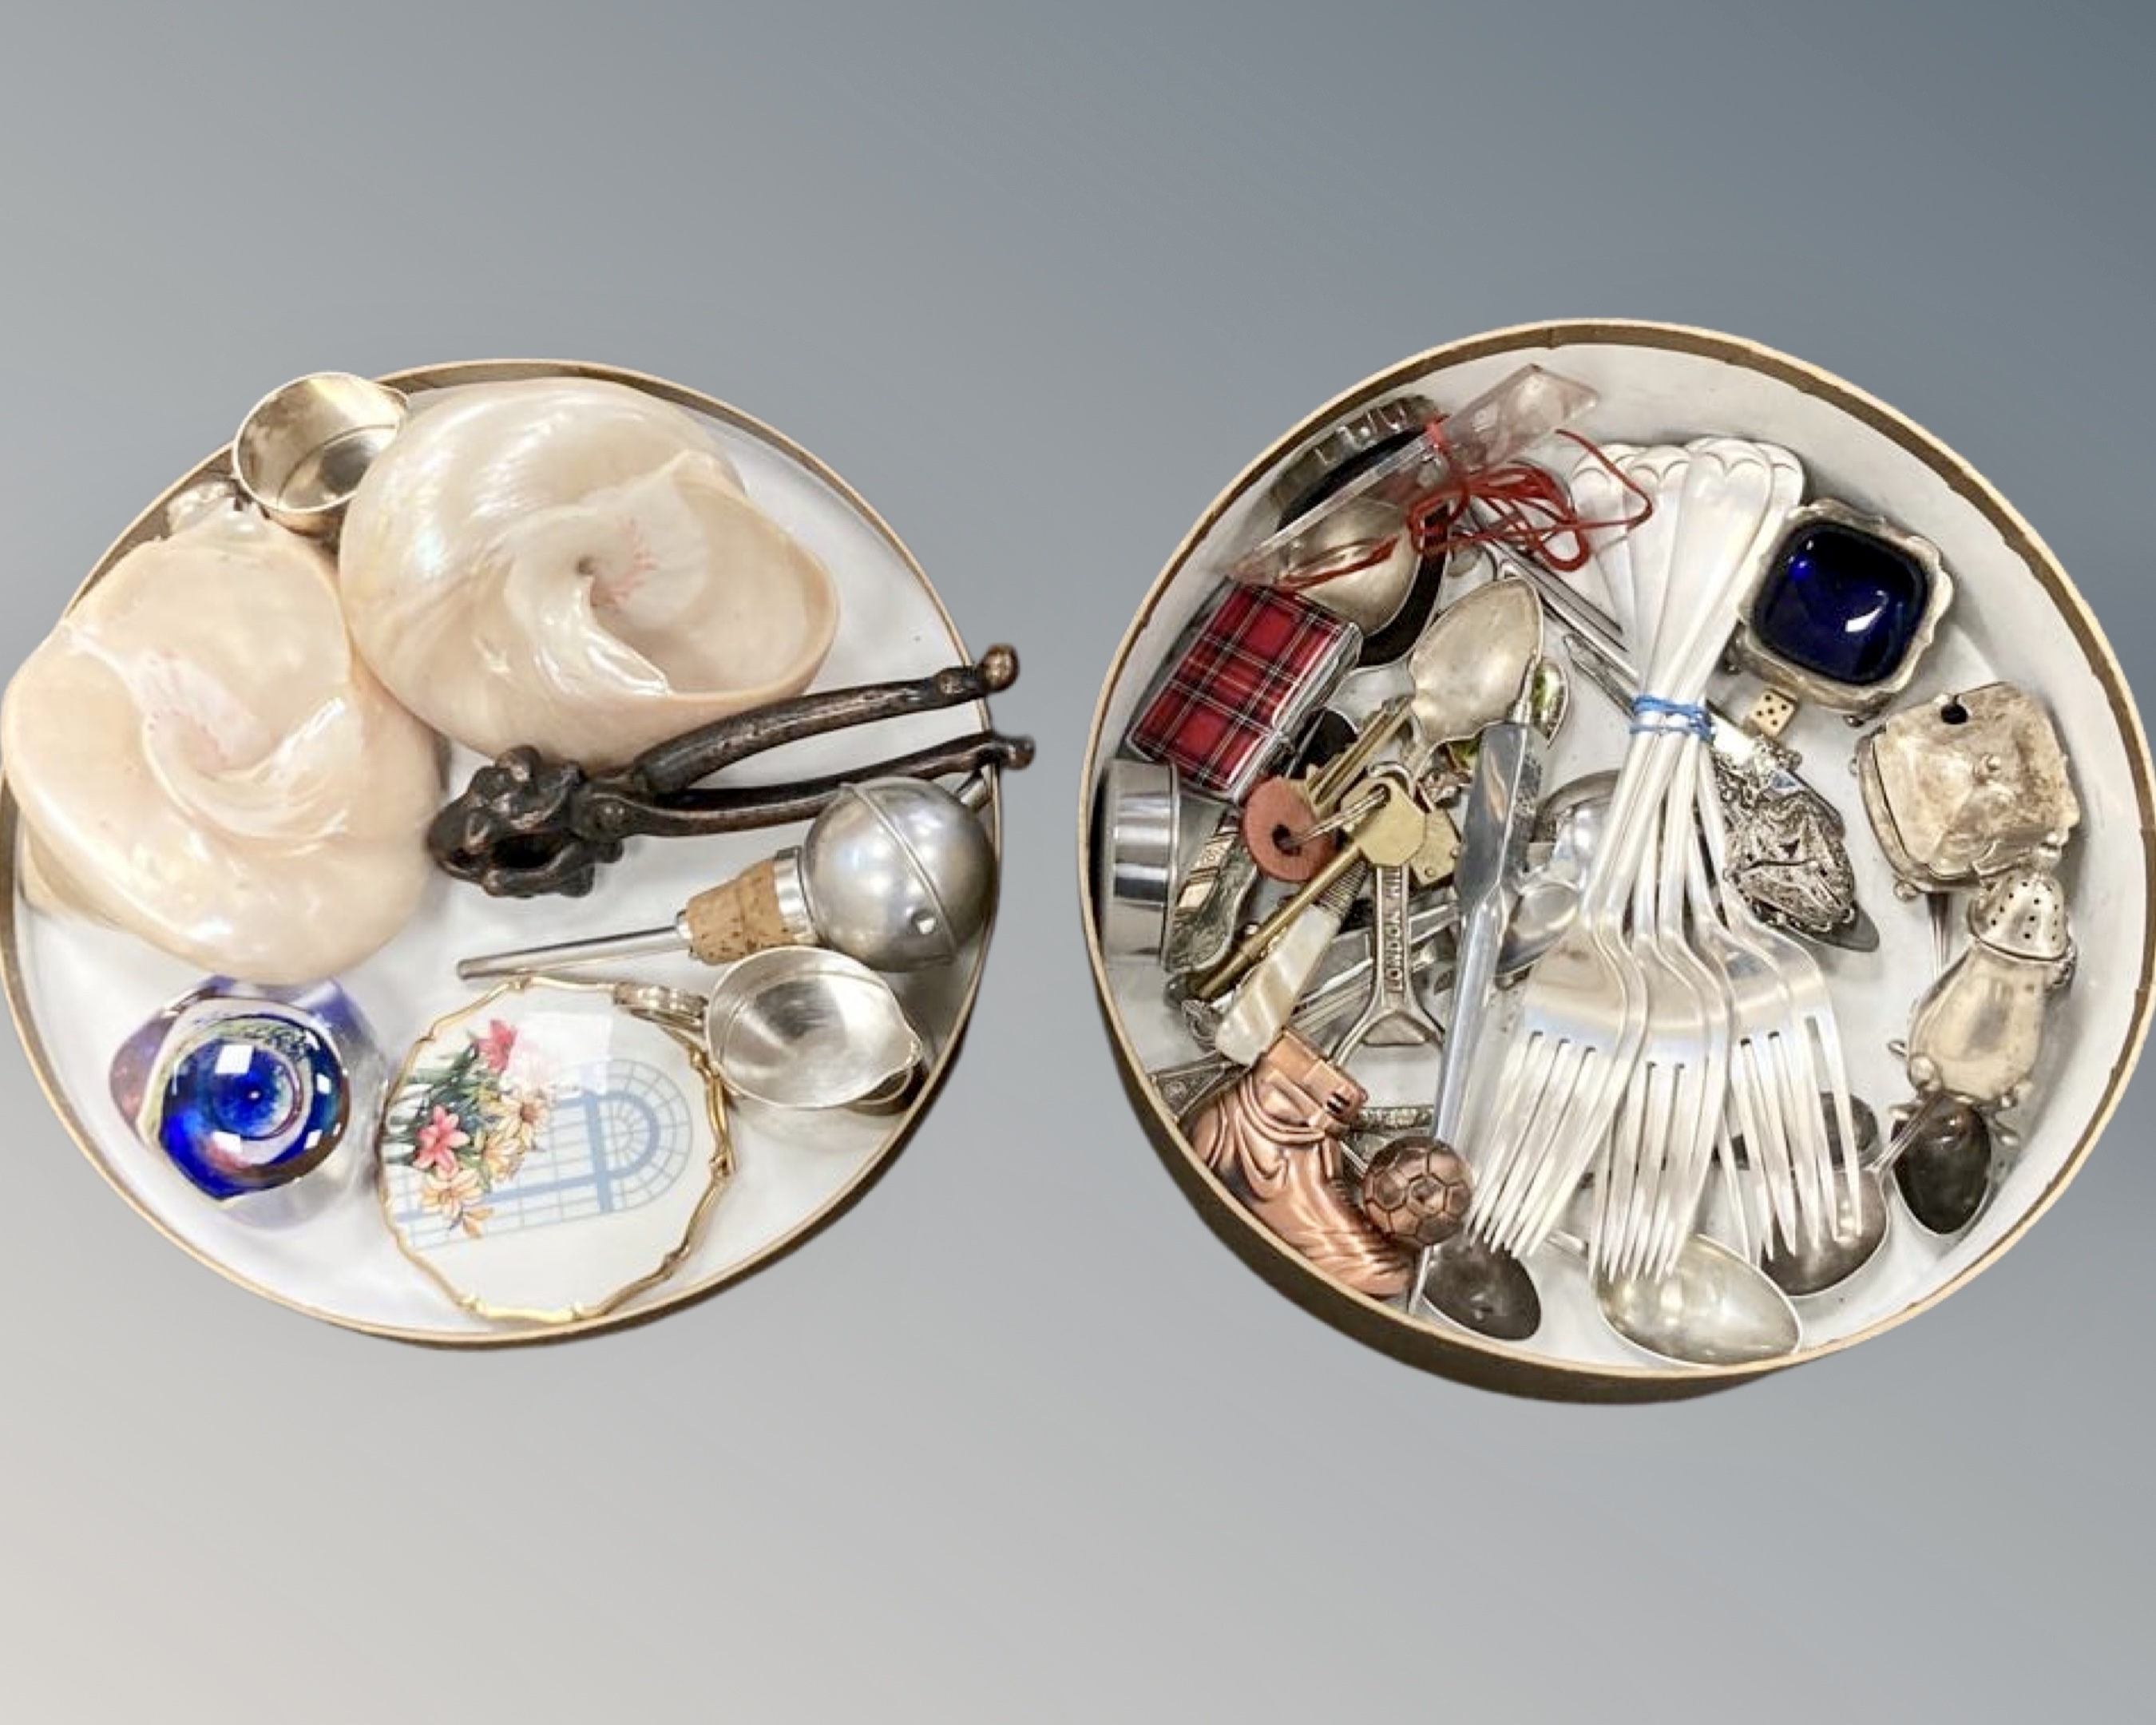 A collection of trinkets, shells, lighters, cutlery,